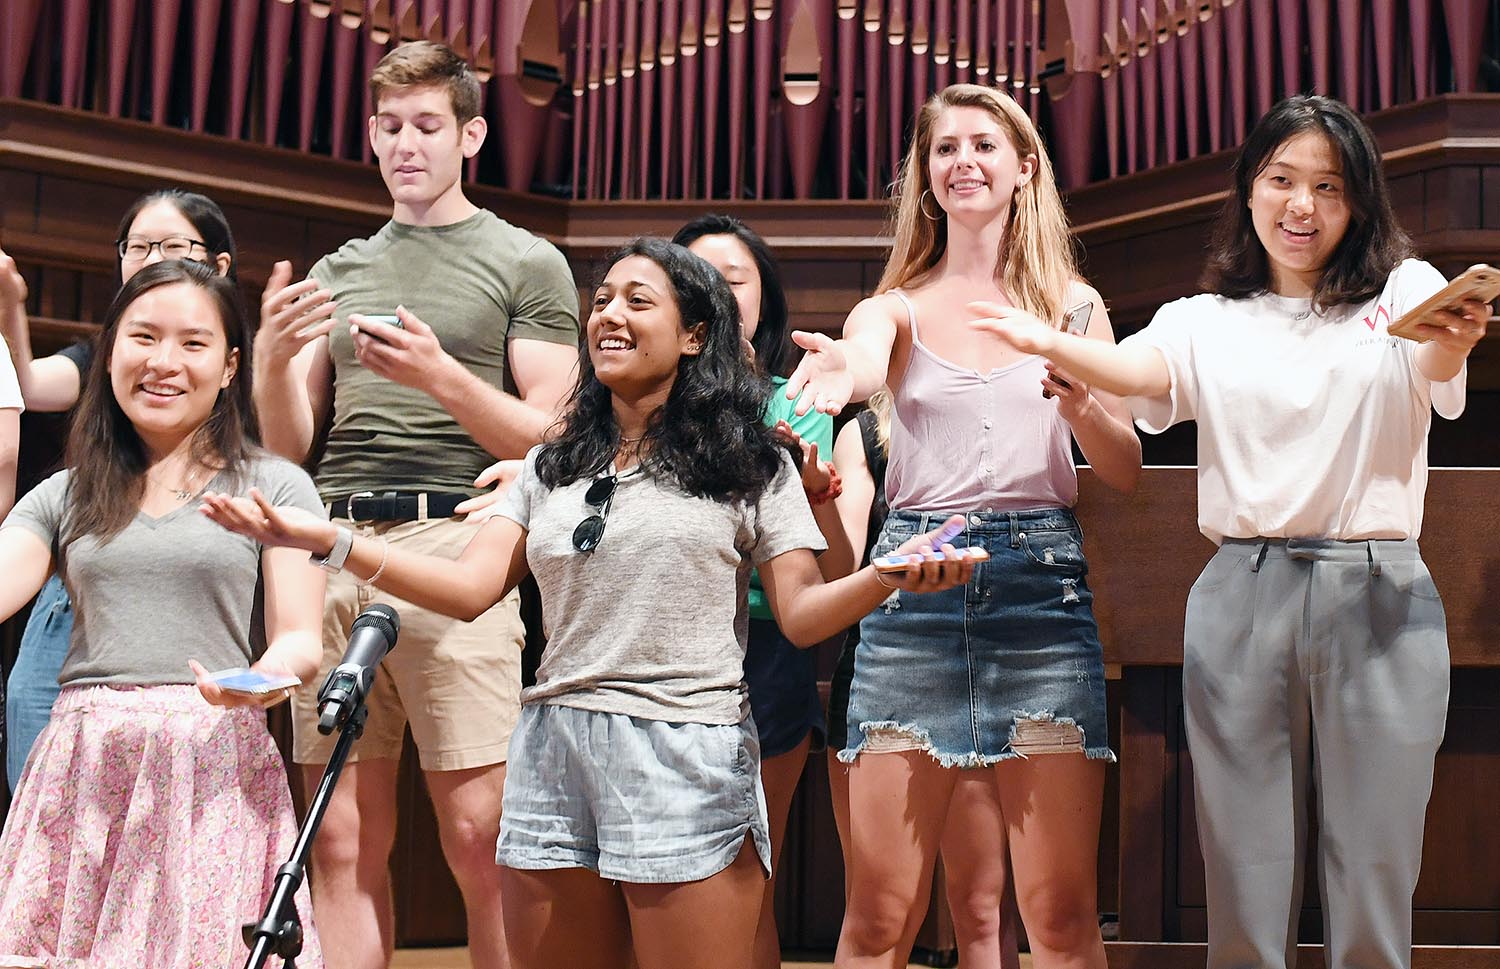 On Aug. 31, Wesleyan's peer advisors wrote and performed a song for the Class of 2022 during a Getting Good Advice workshop, held in conjunction with New Student Orientation.